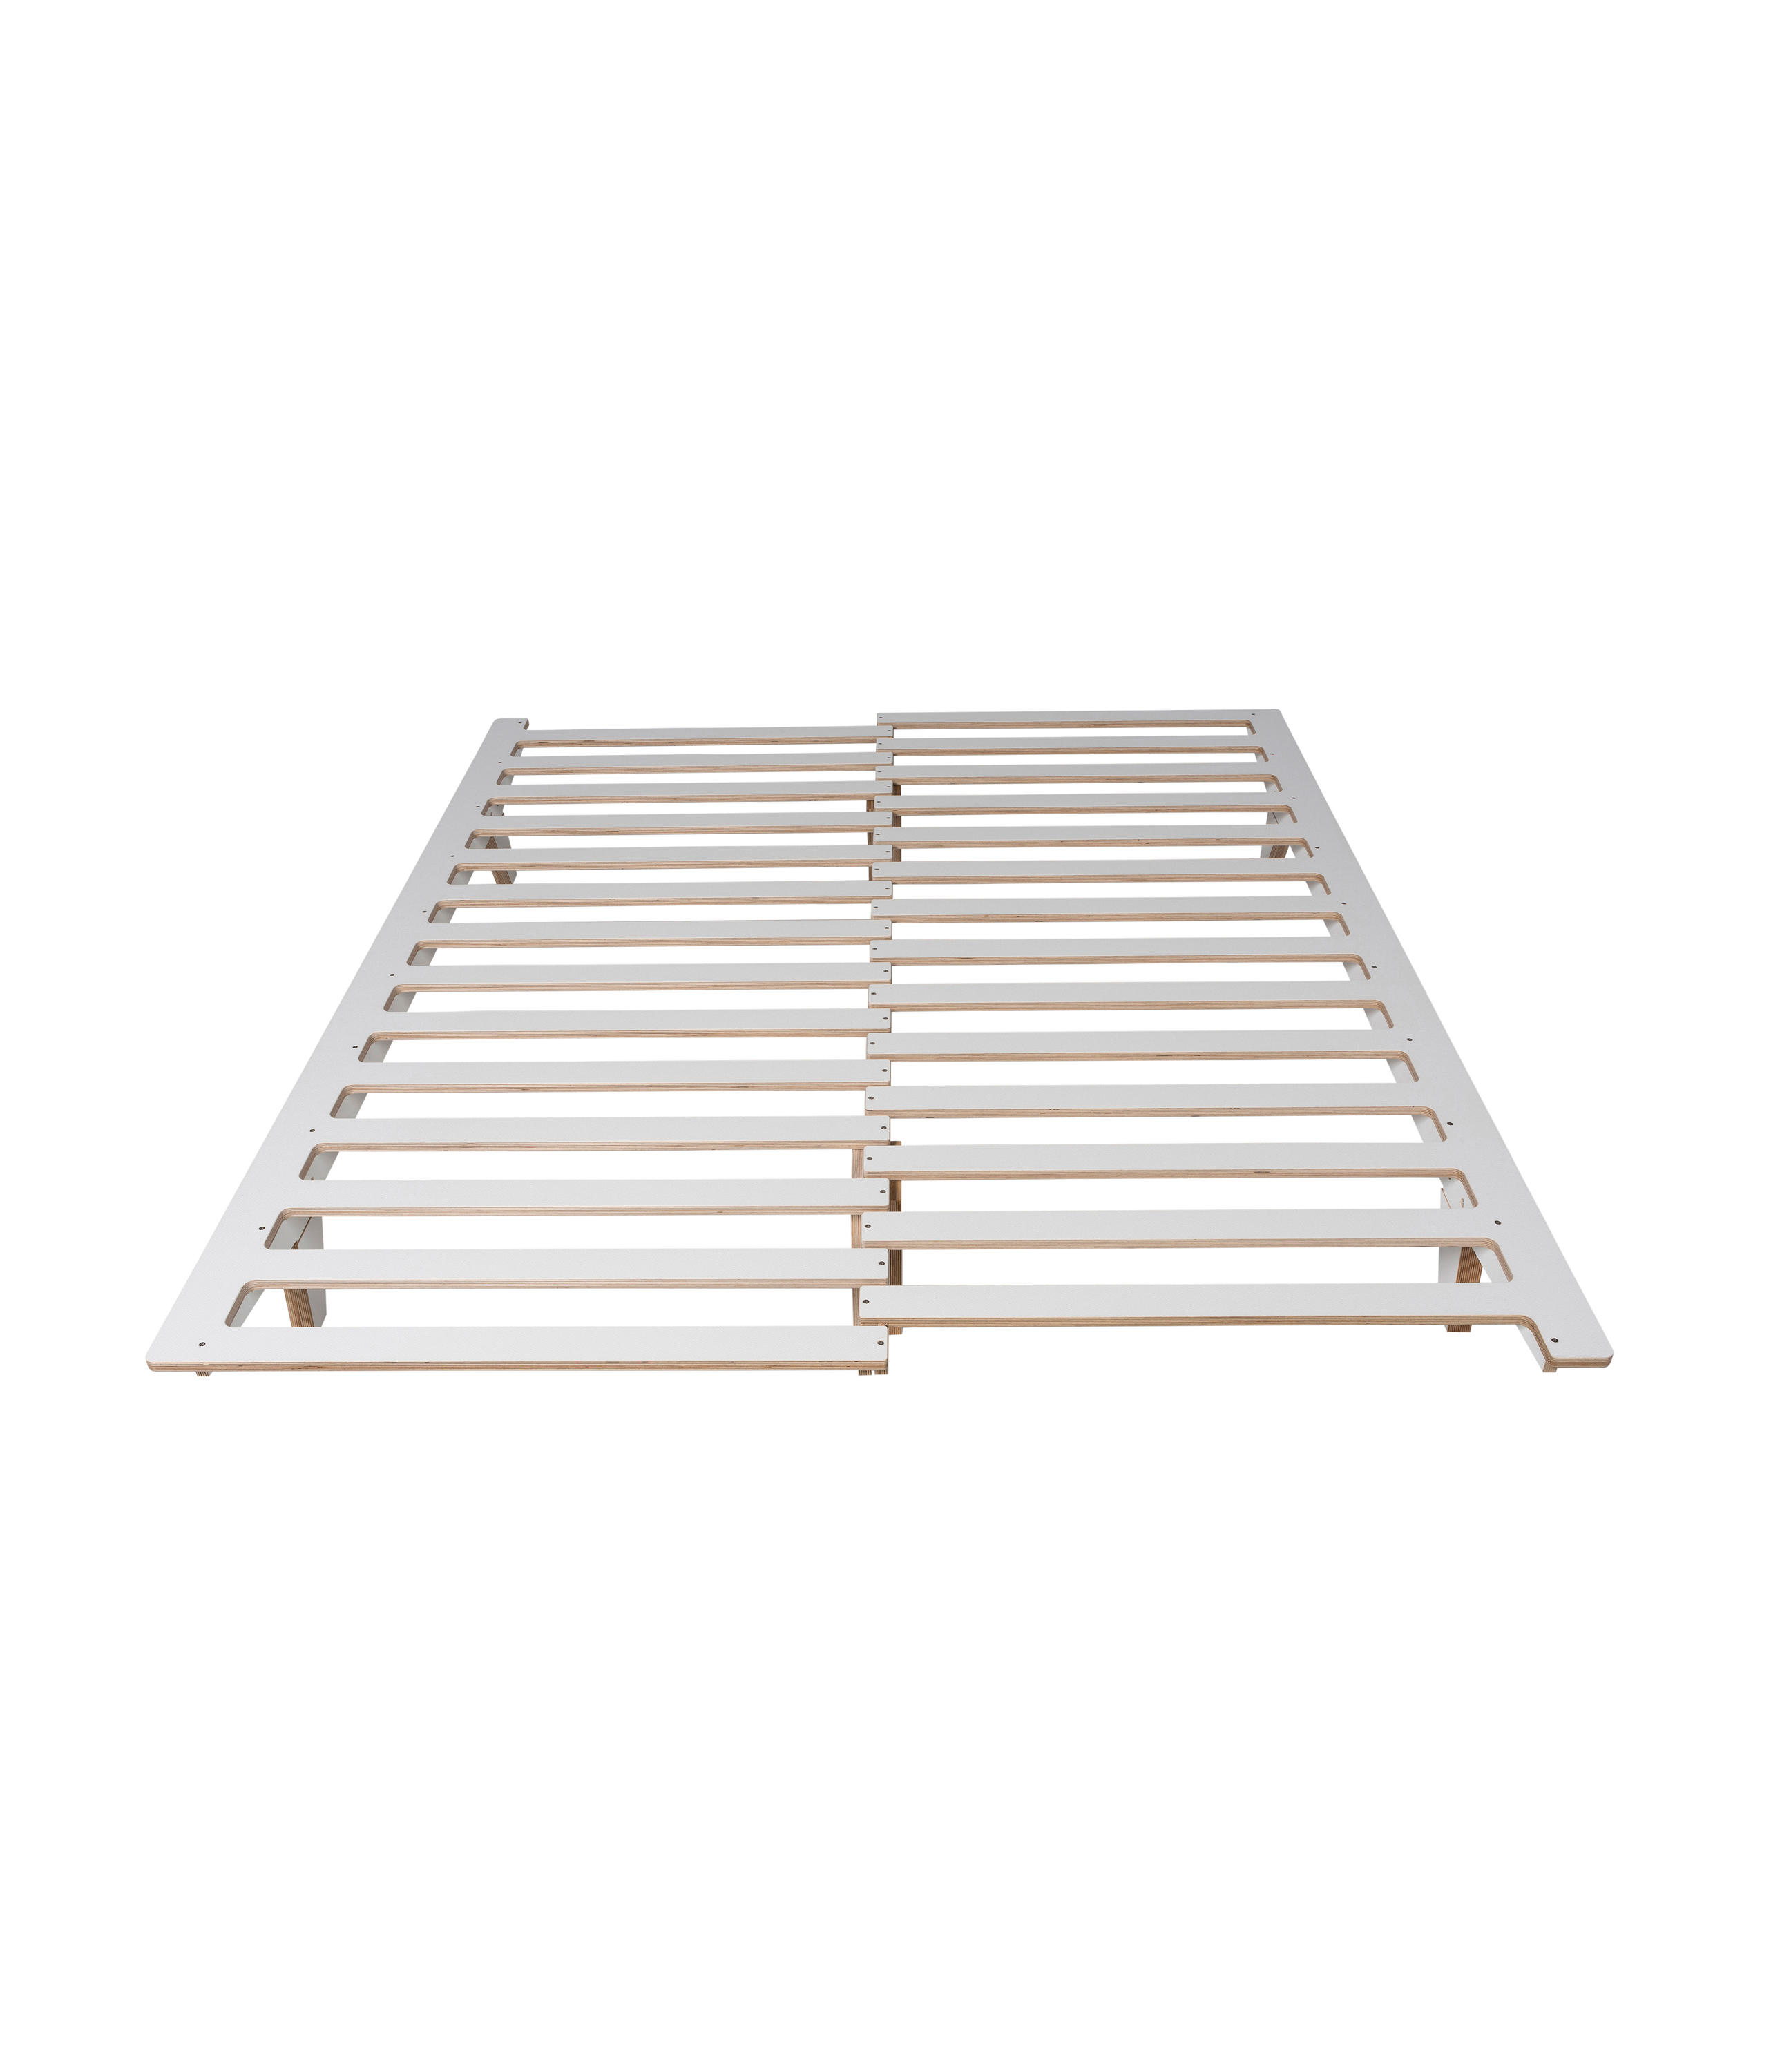 SN/2 BETT - Beds from seledue | Architonic